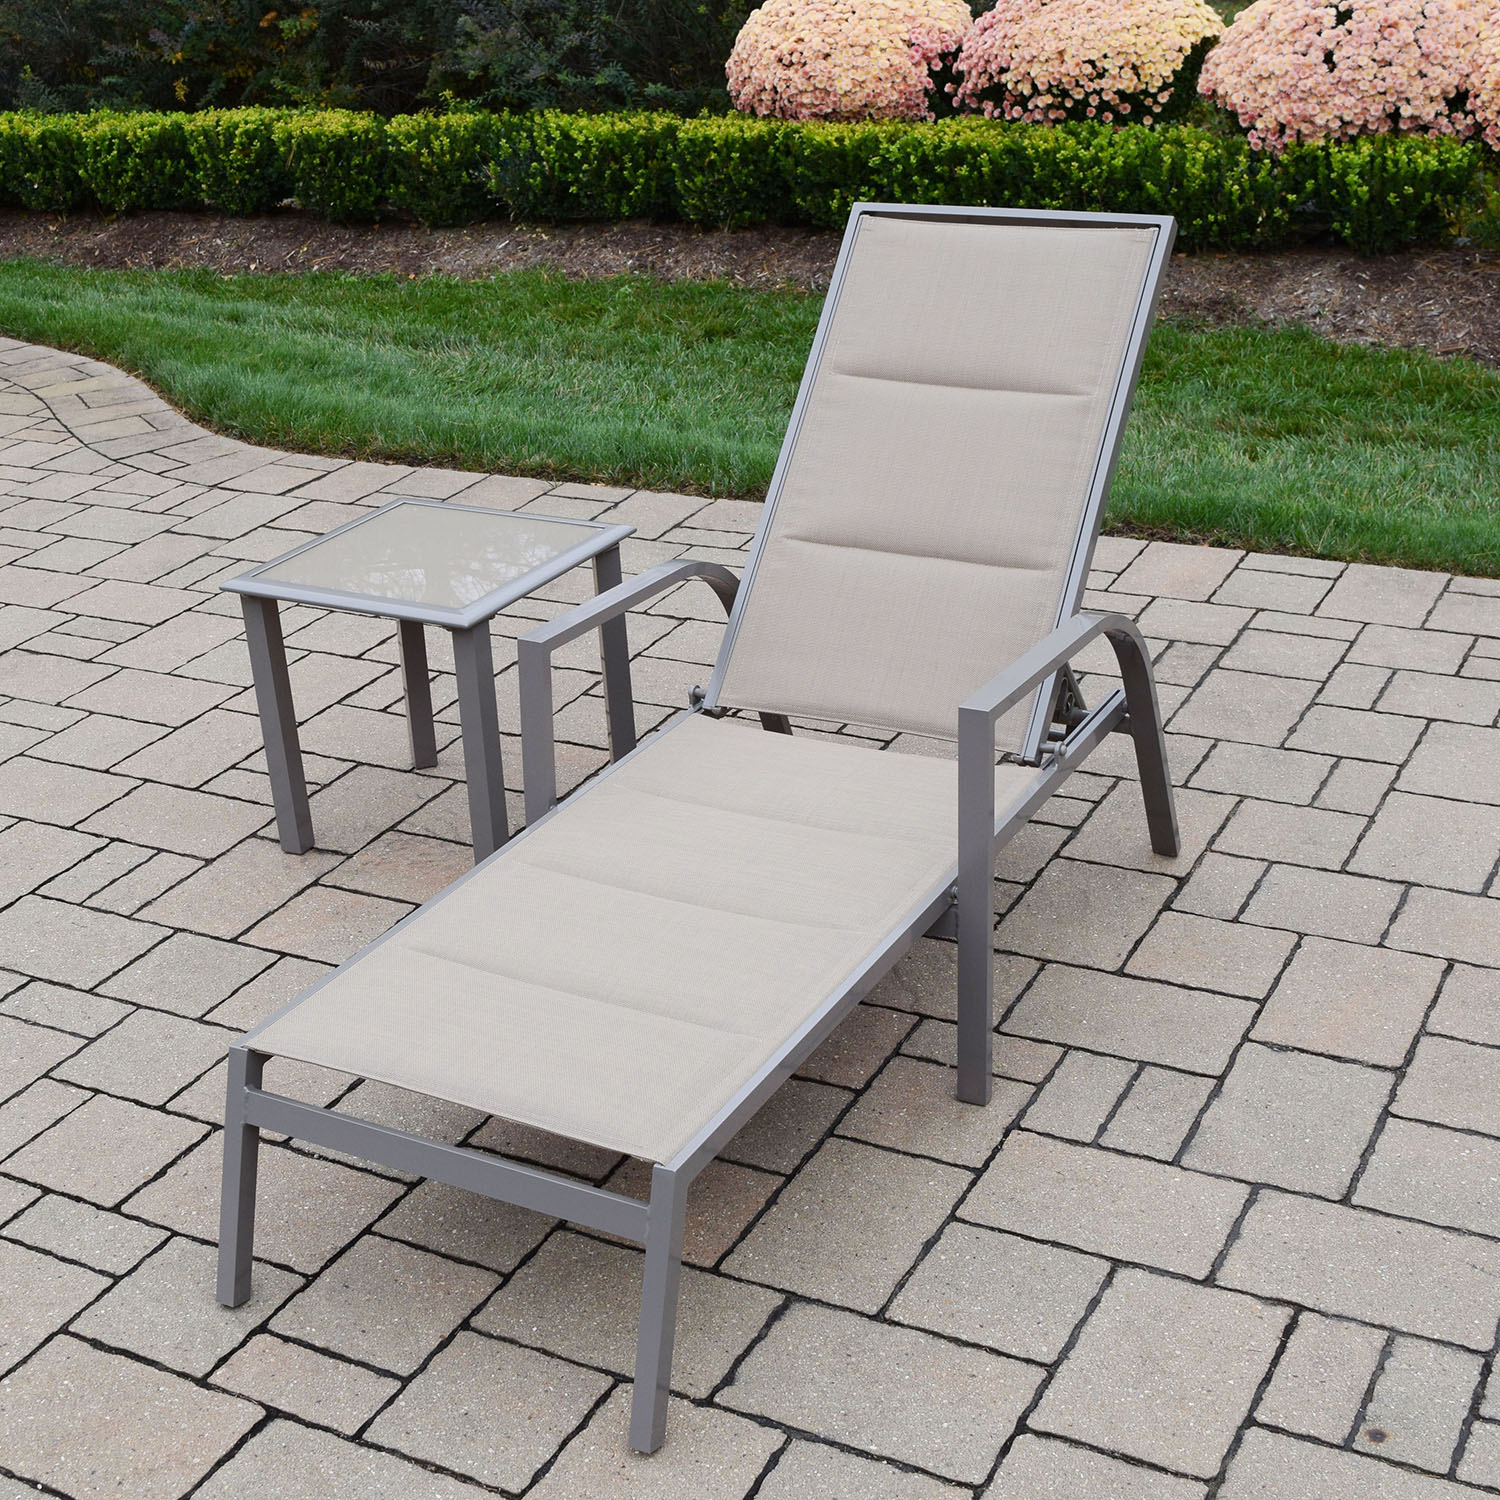 Champagne Sling Aluminum Chaise Lounge & Side Table